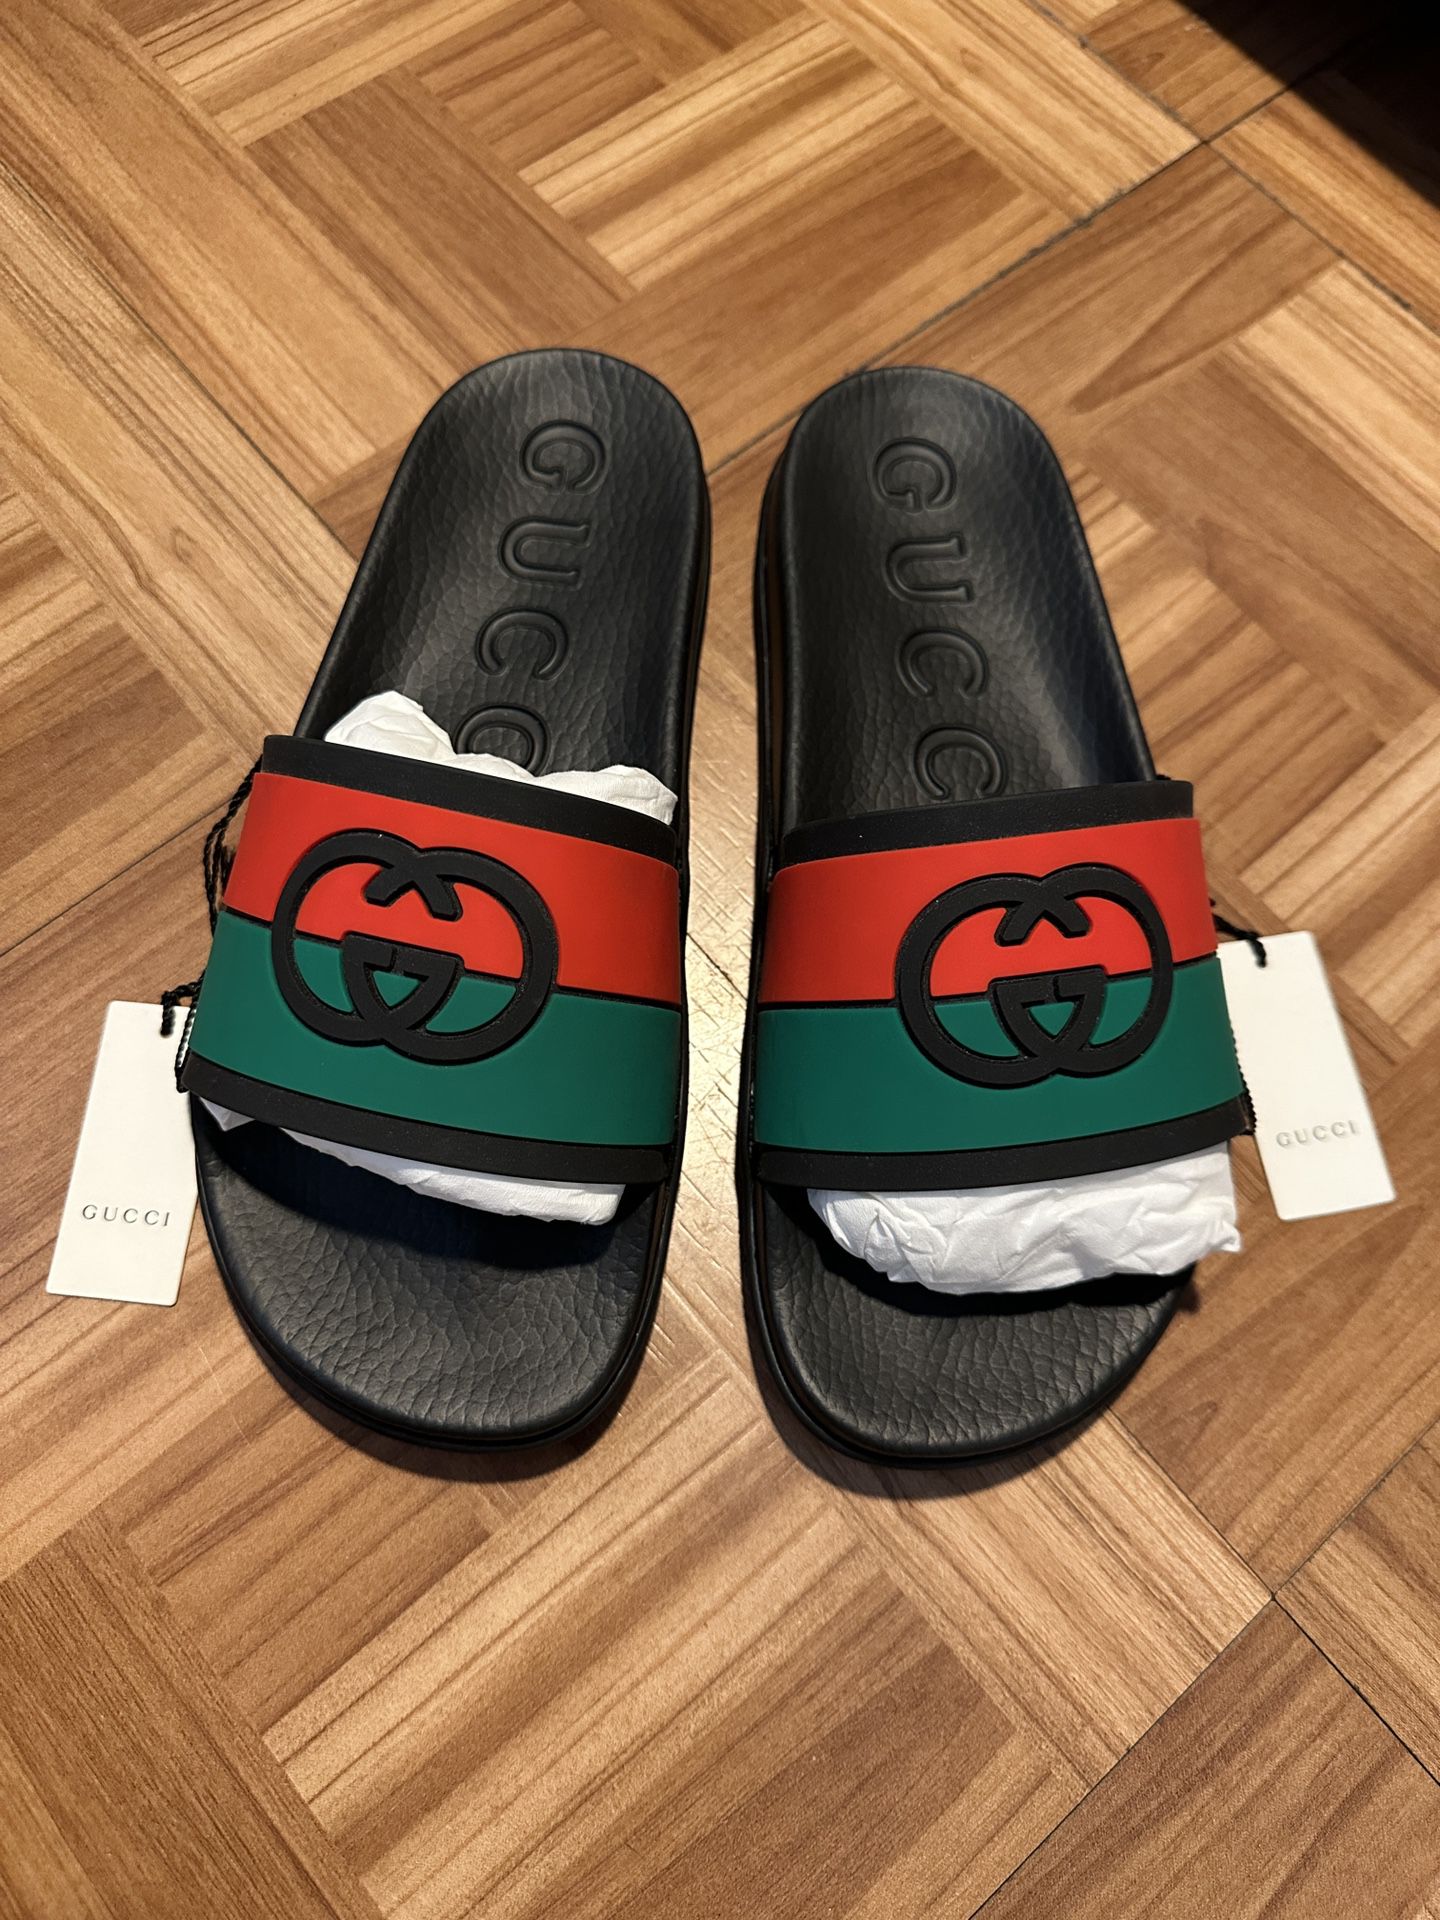 Slippers Gucci 100% for Sale in Stoughton, MA - OfferUp